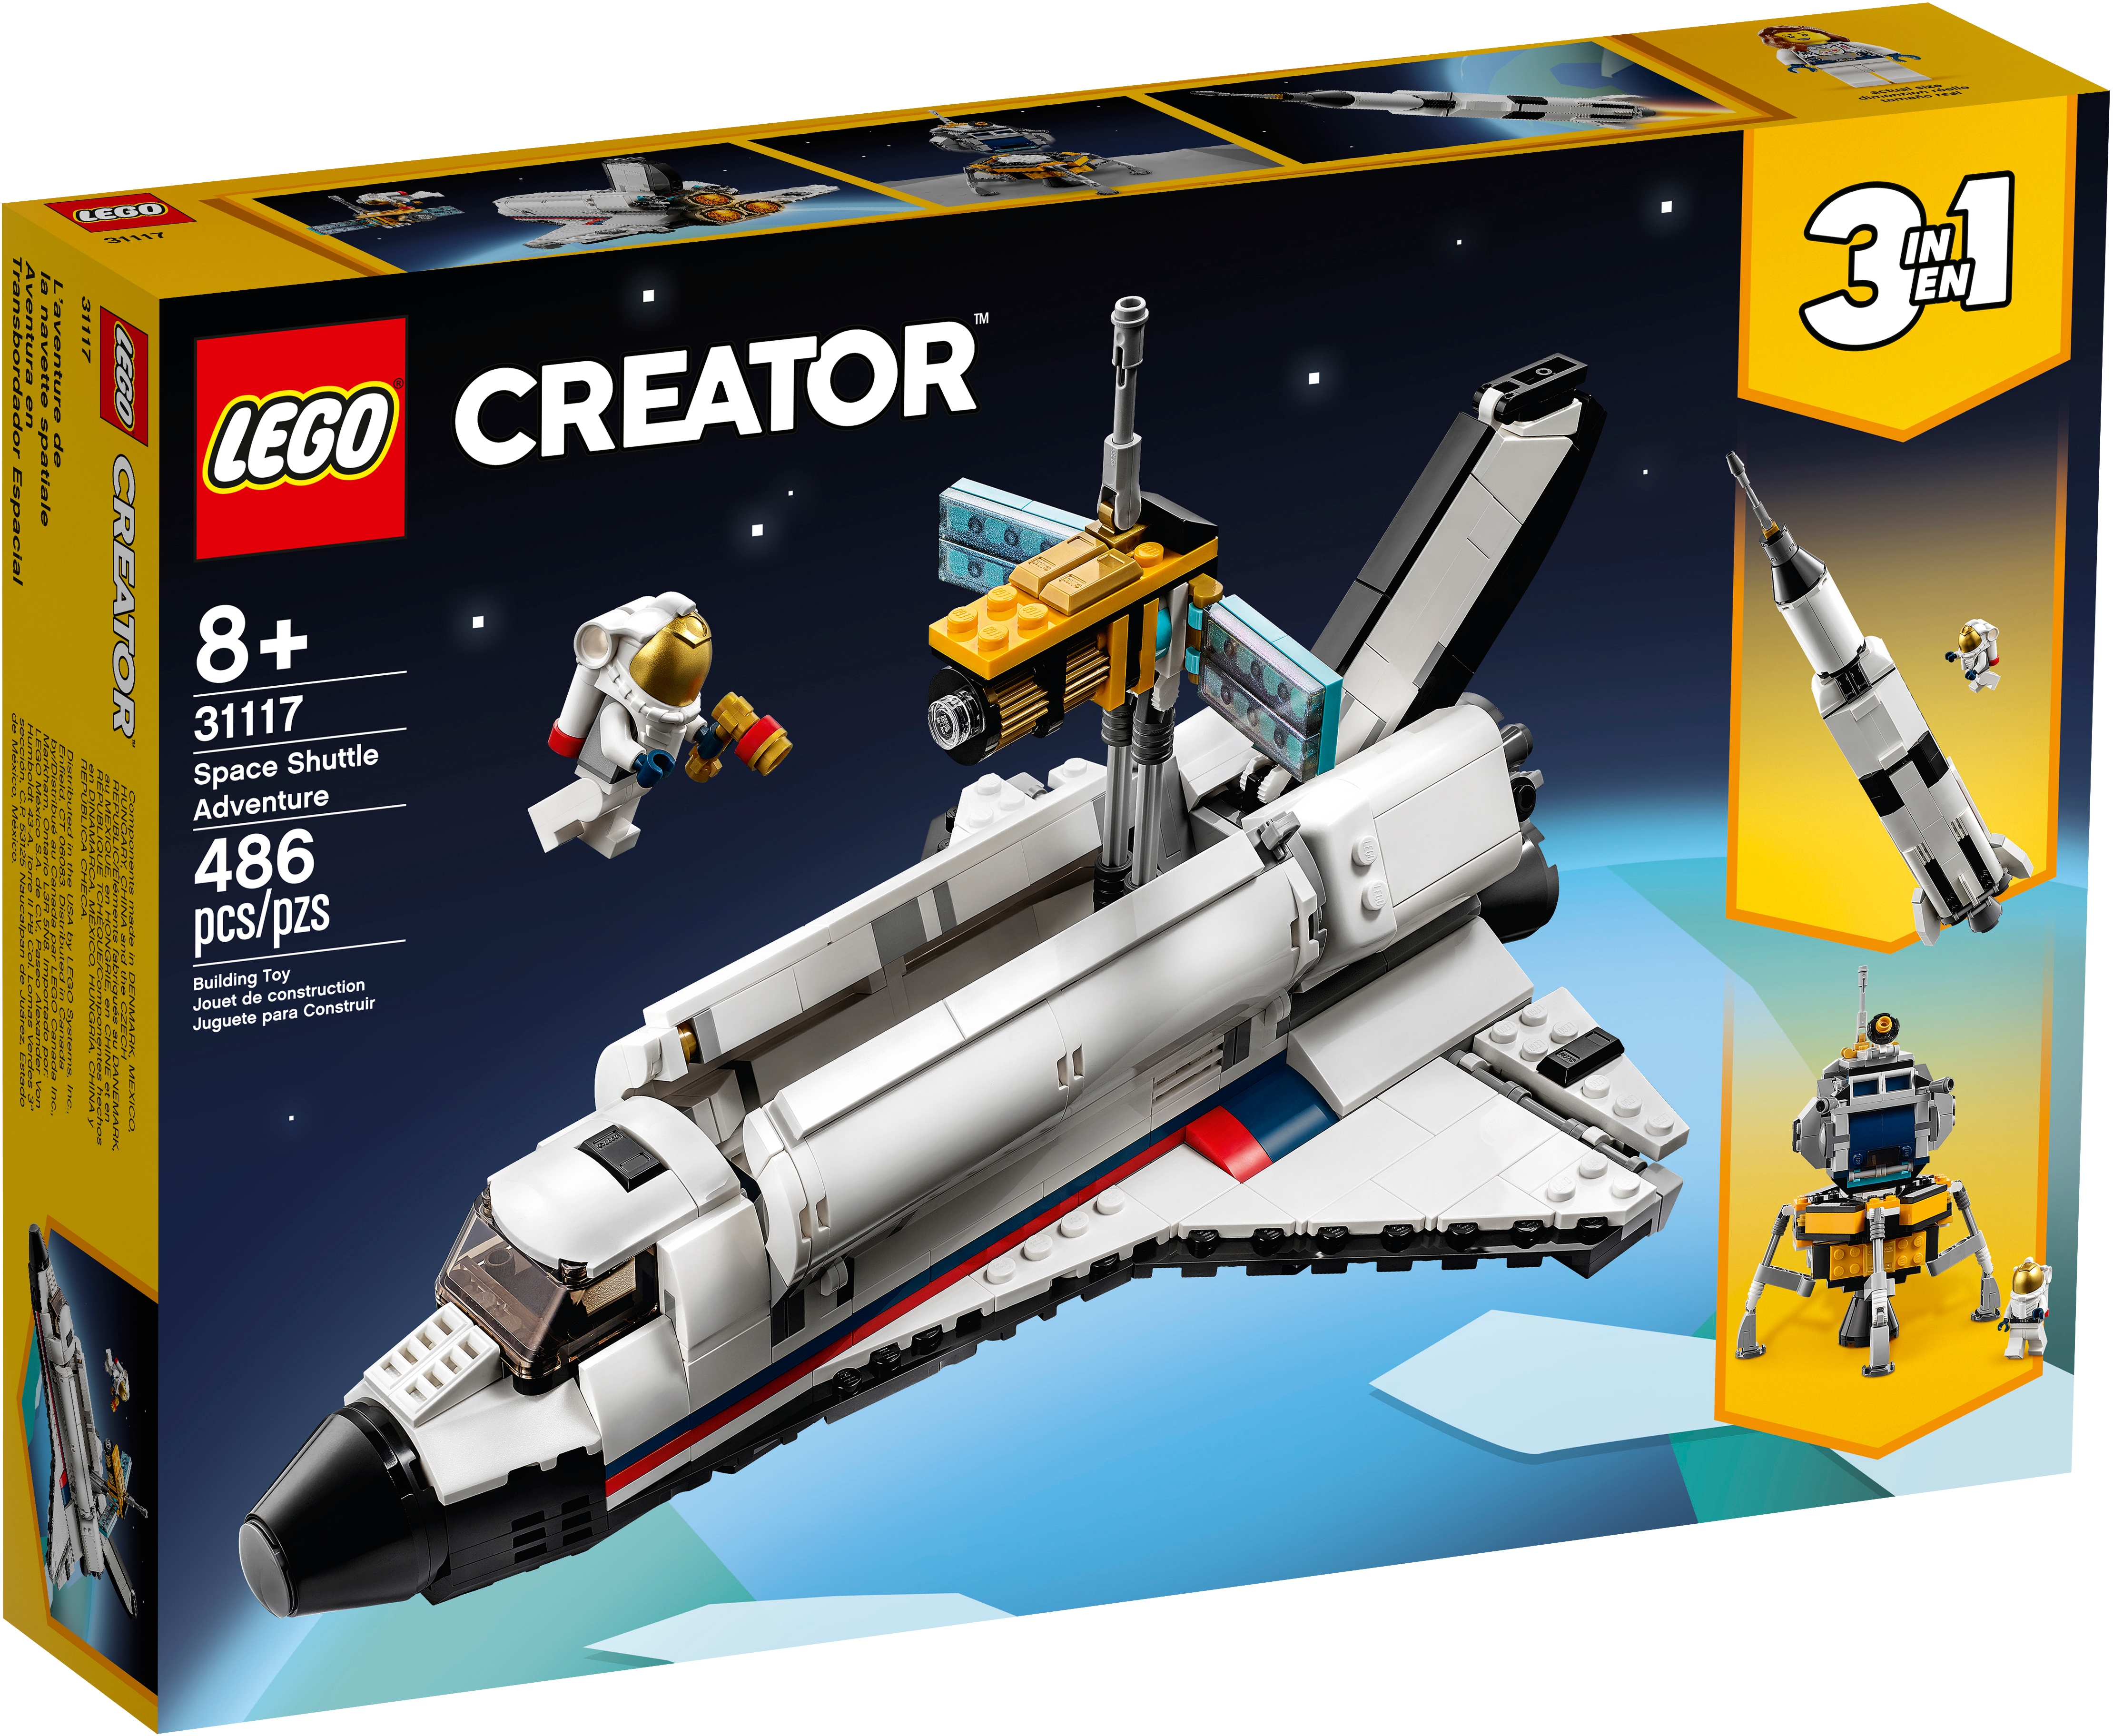 Space Shuttle Adventure 31117 | Creator 3-in-1 | Buy online at the 